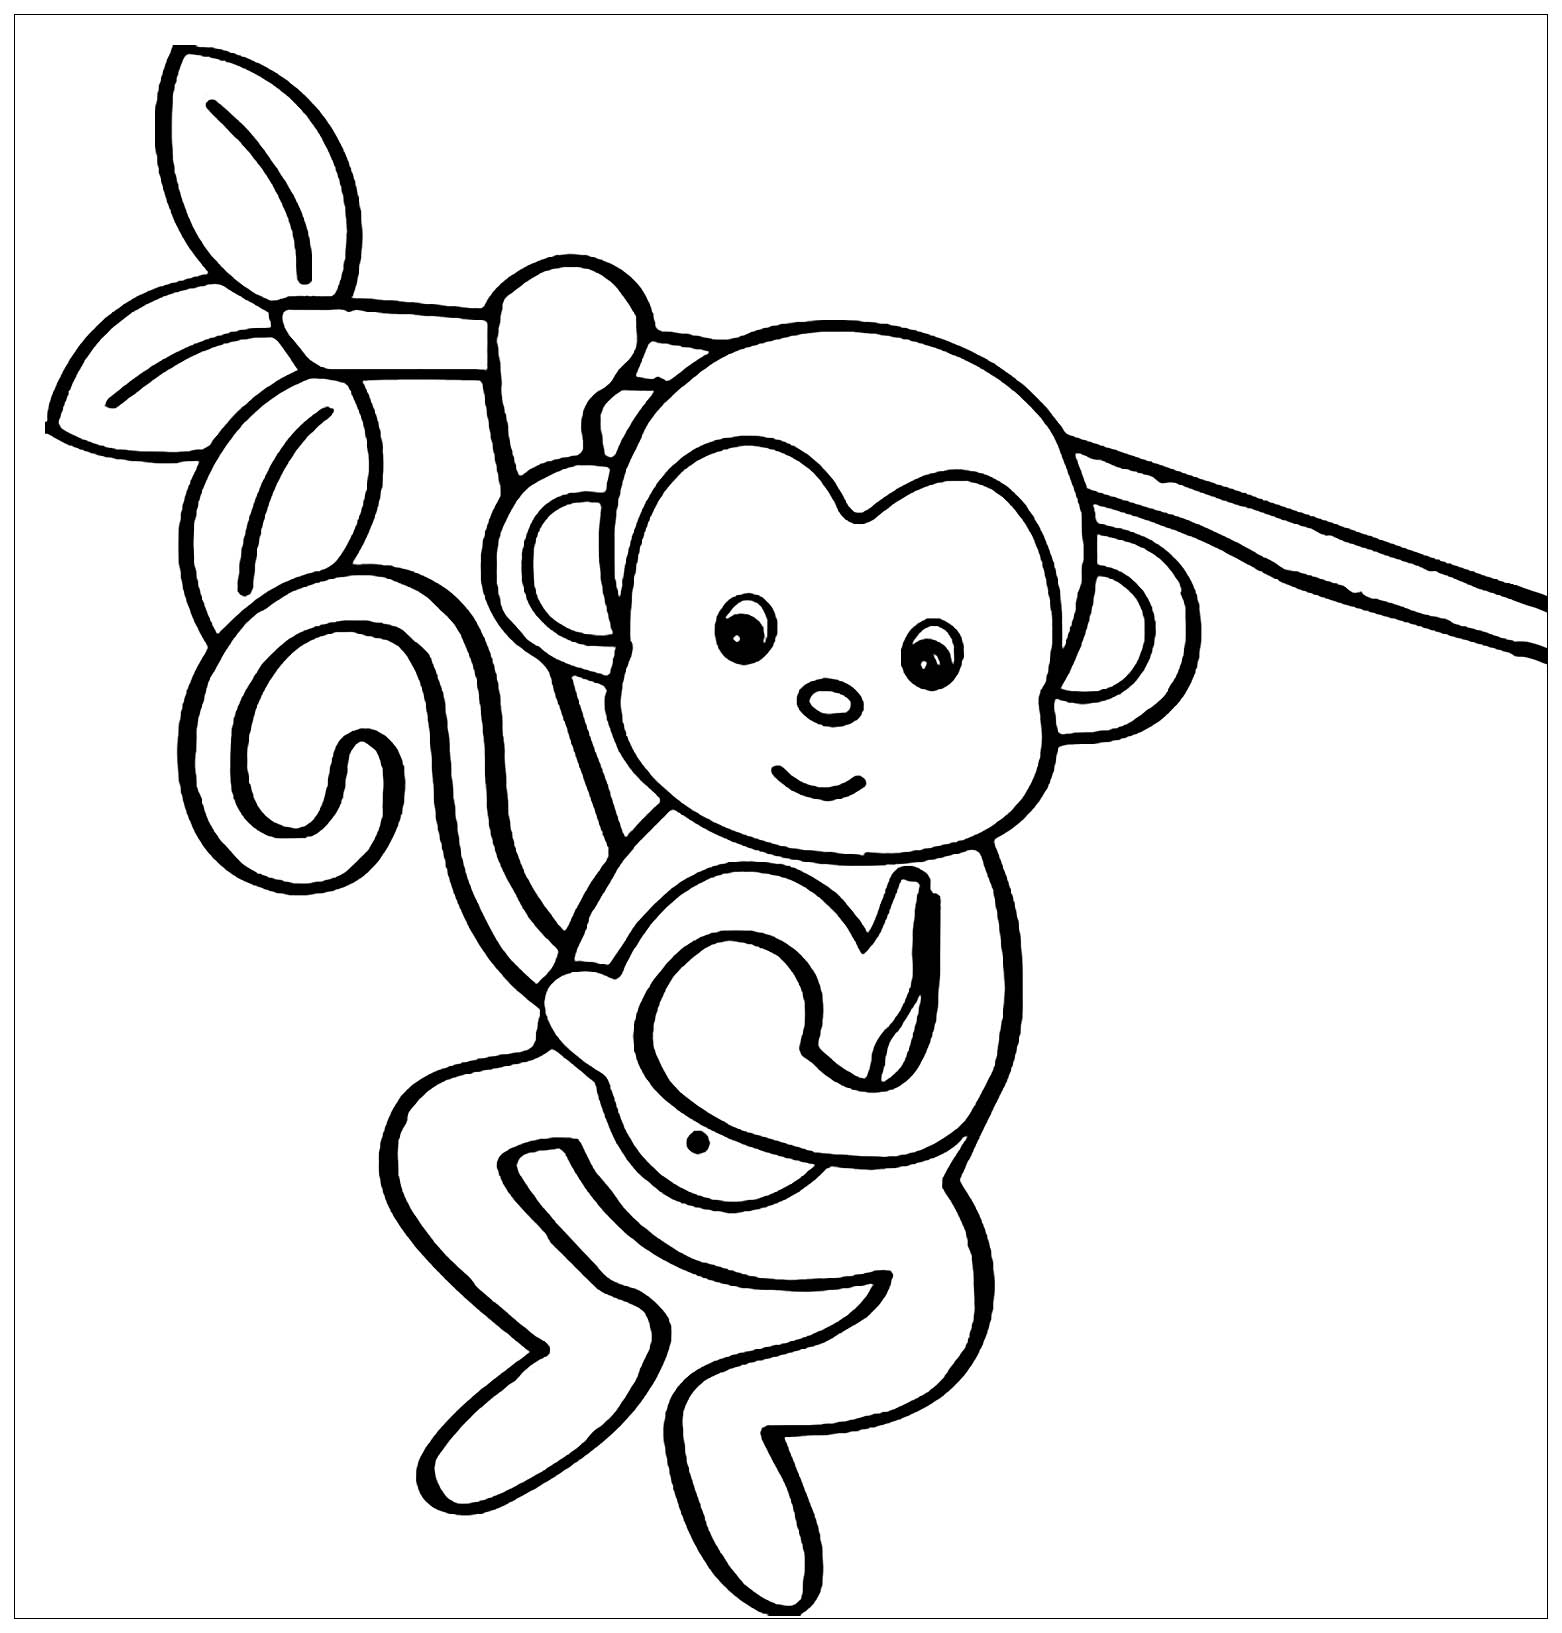 Monkeys to color for children   Monkeys Kids Coloring Pages